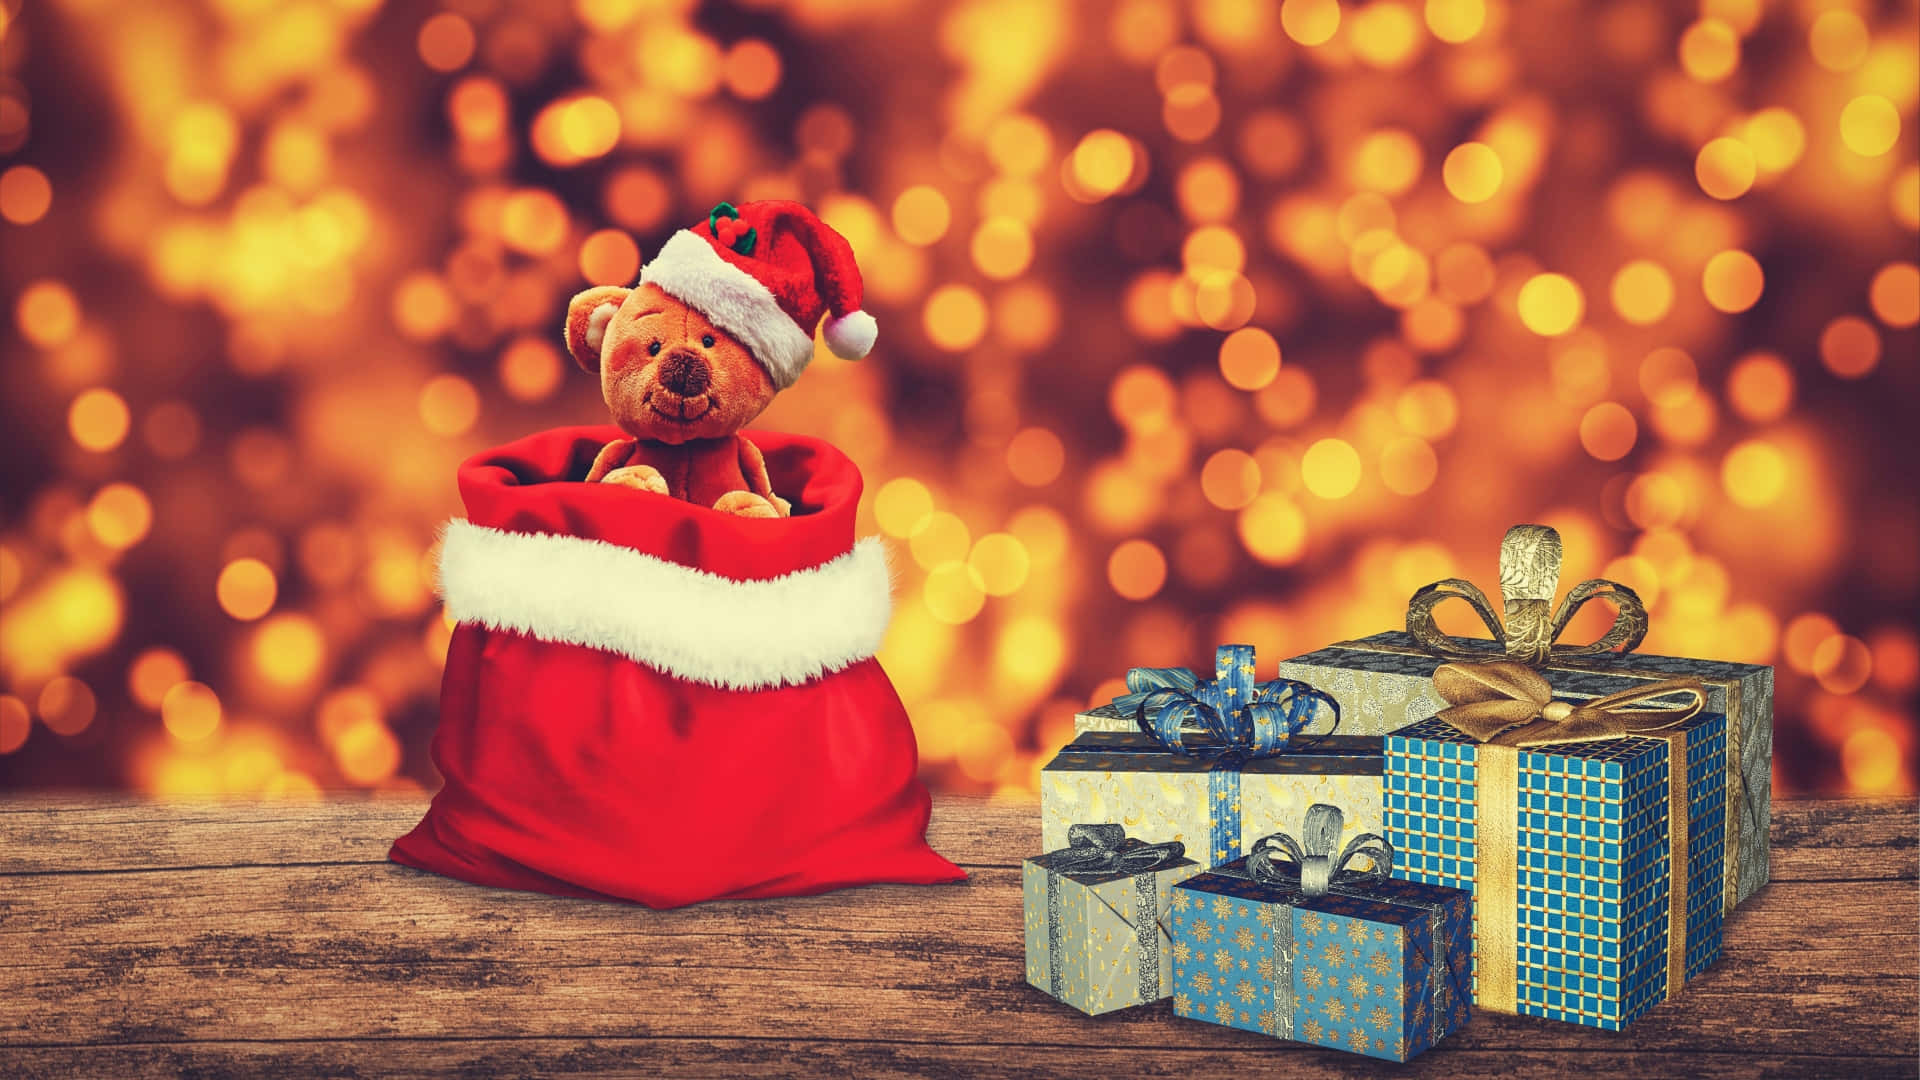 Teddy And Christmas Gifts Picture